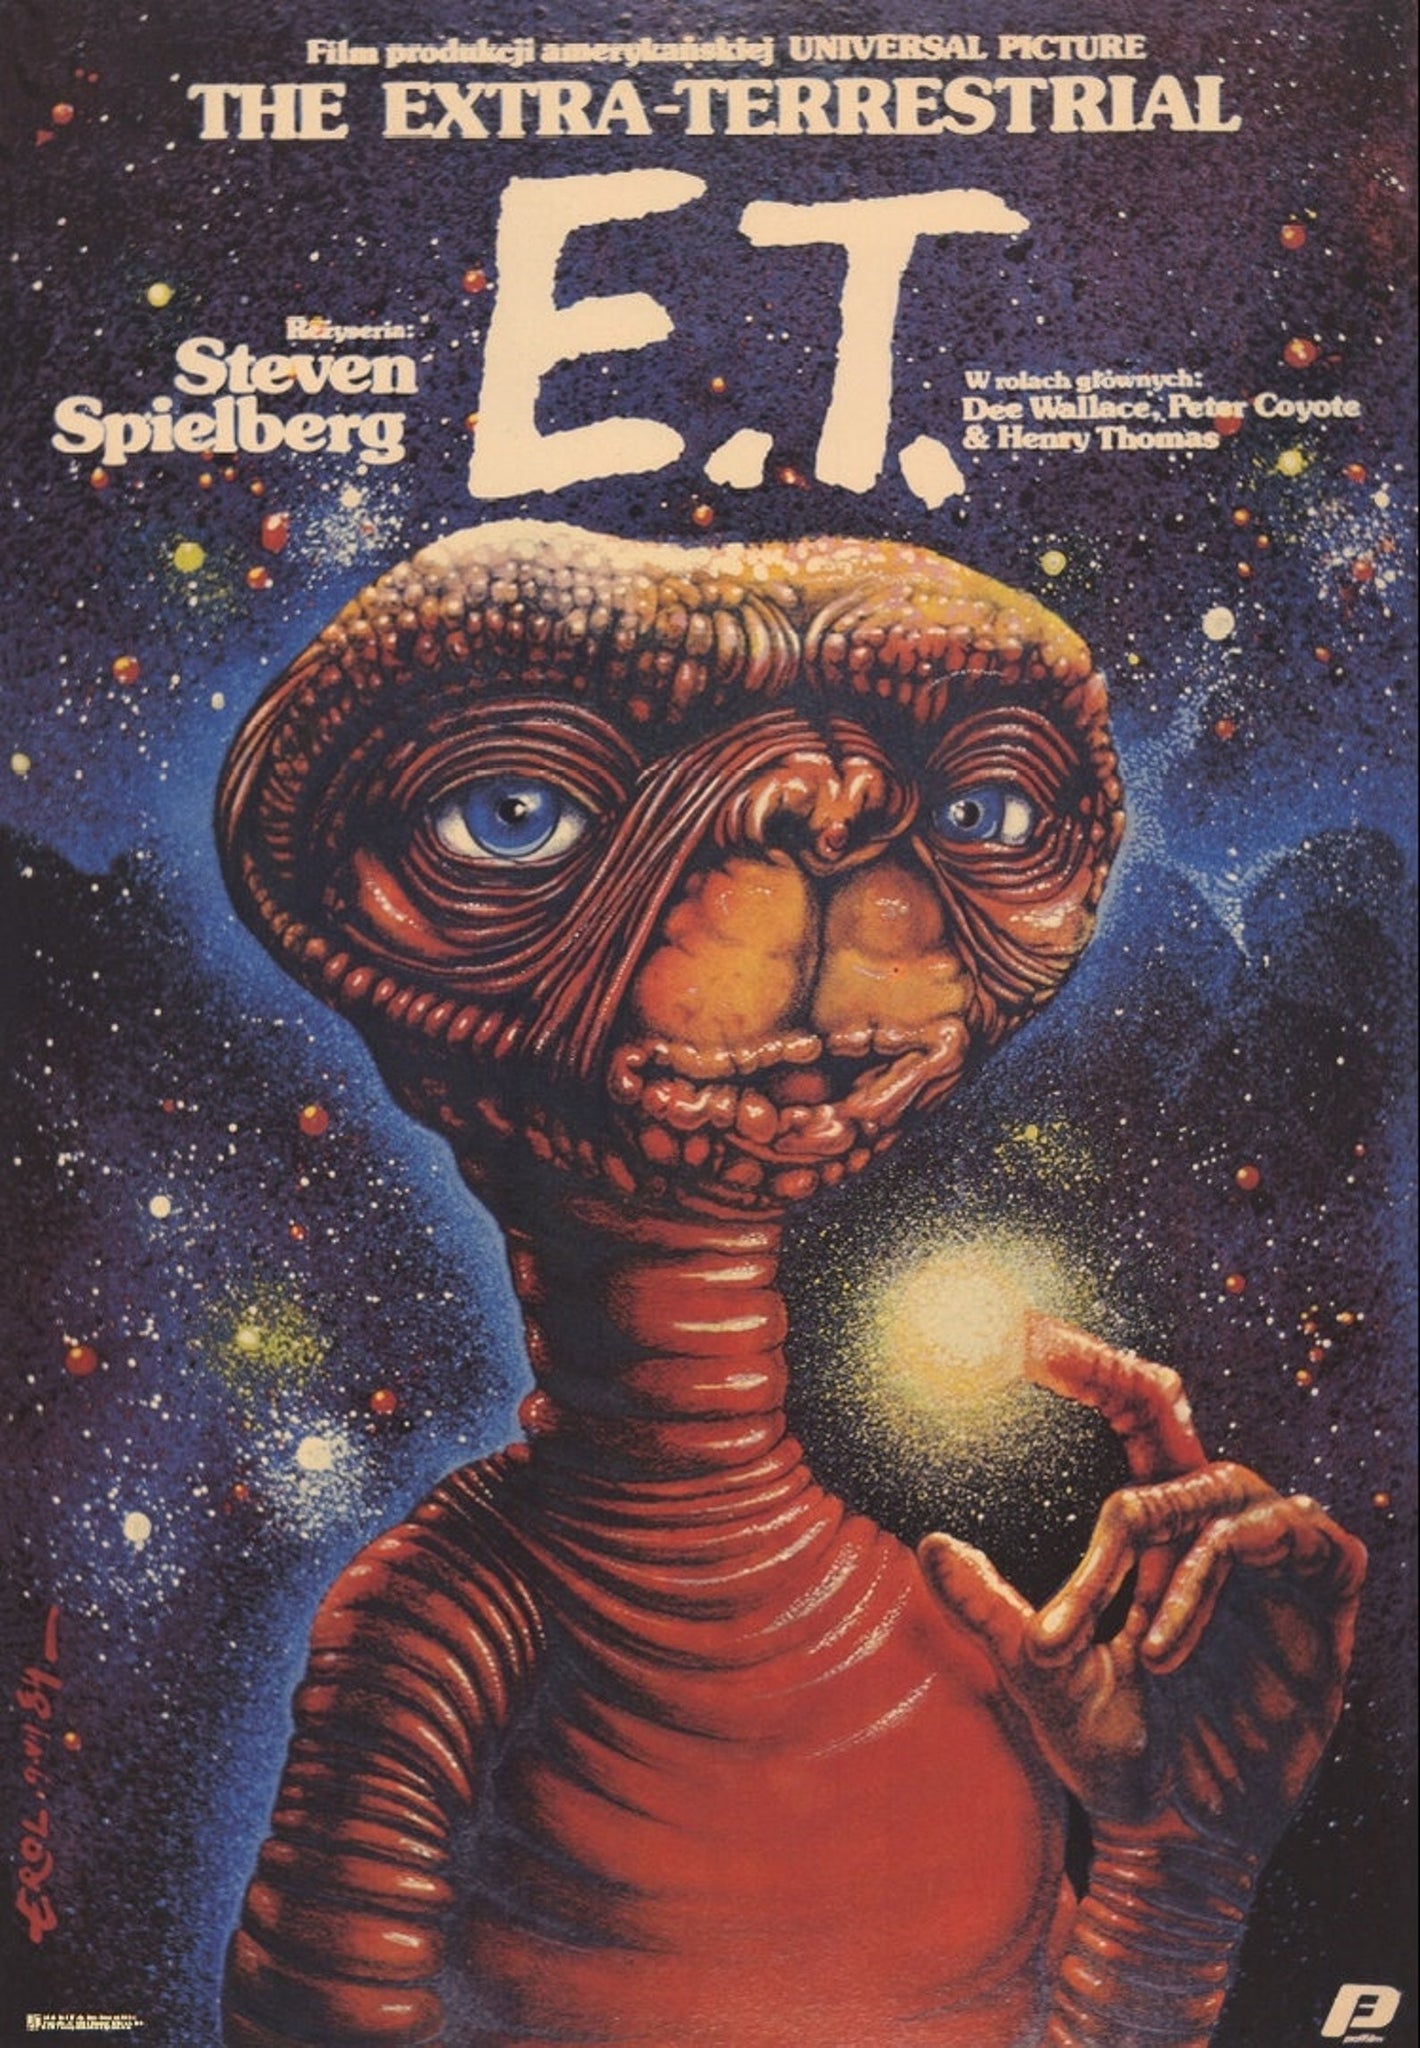 An official Limited Edition Polish School of Posters reprint (c.500) of 1982 American Sci-Fi classic E.T.